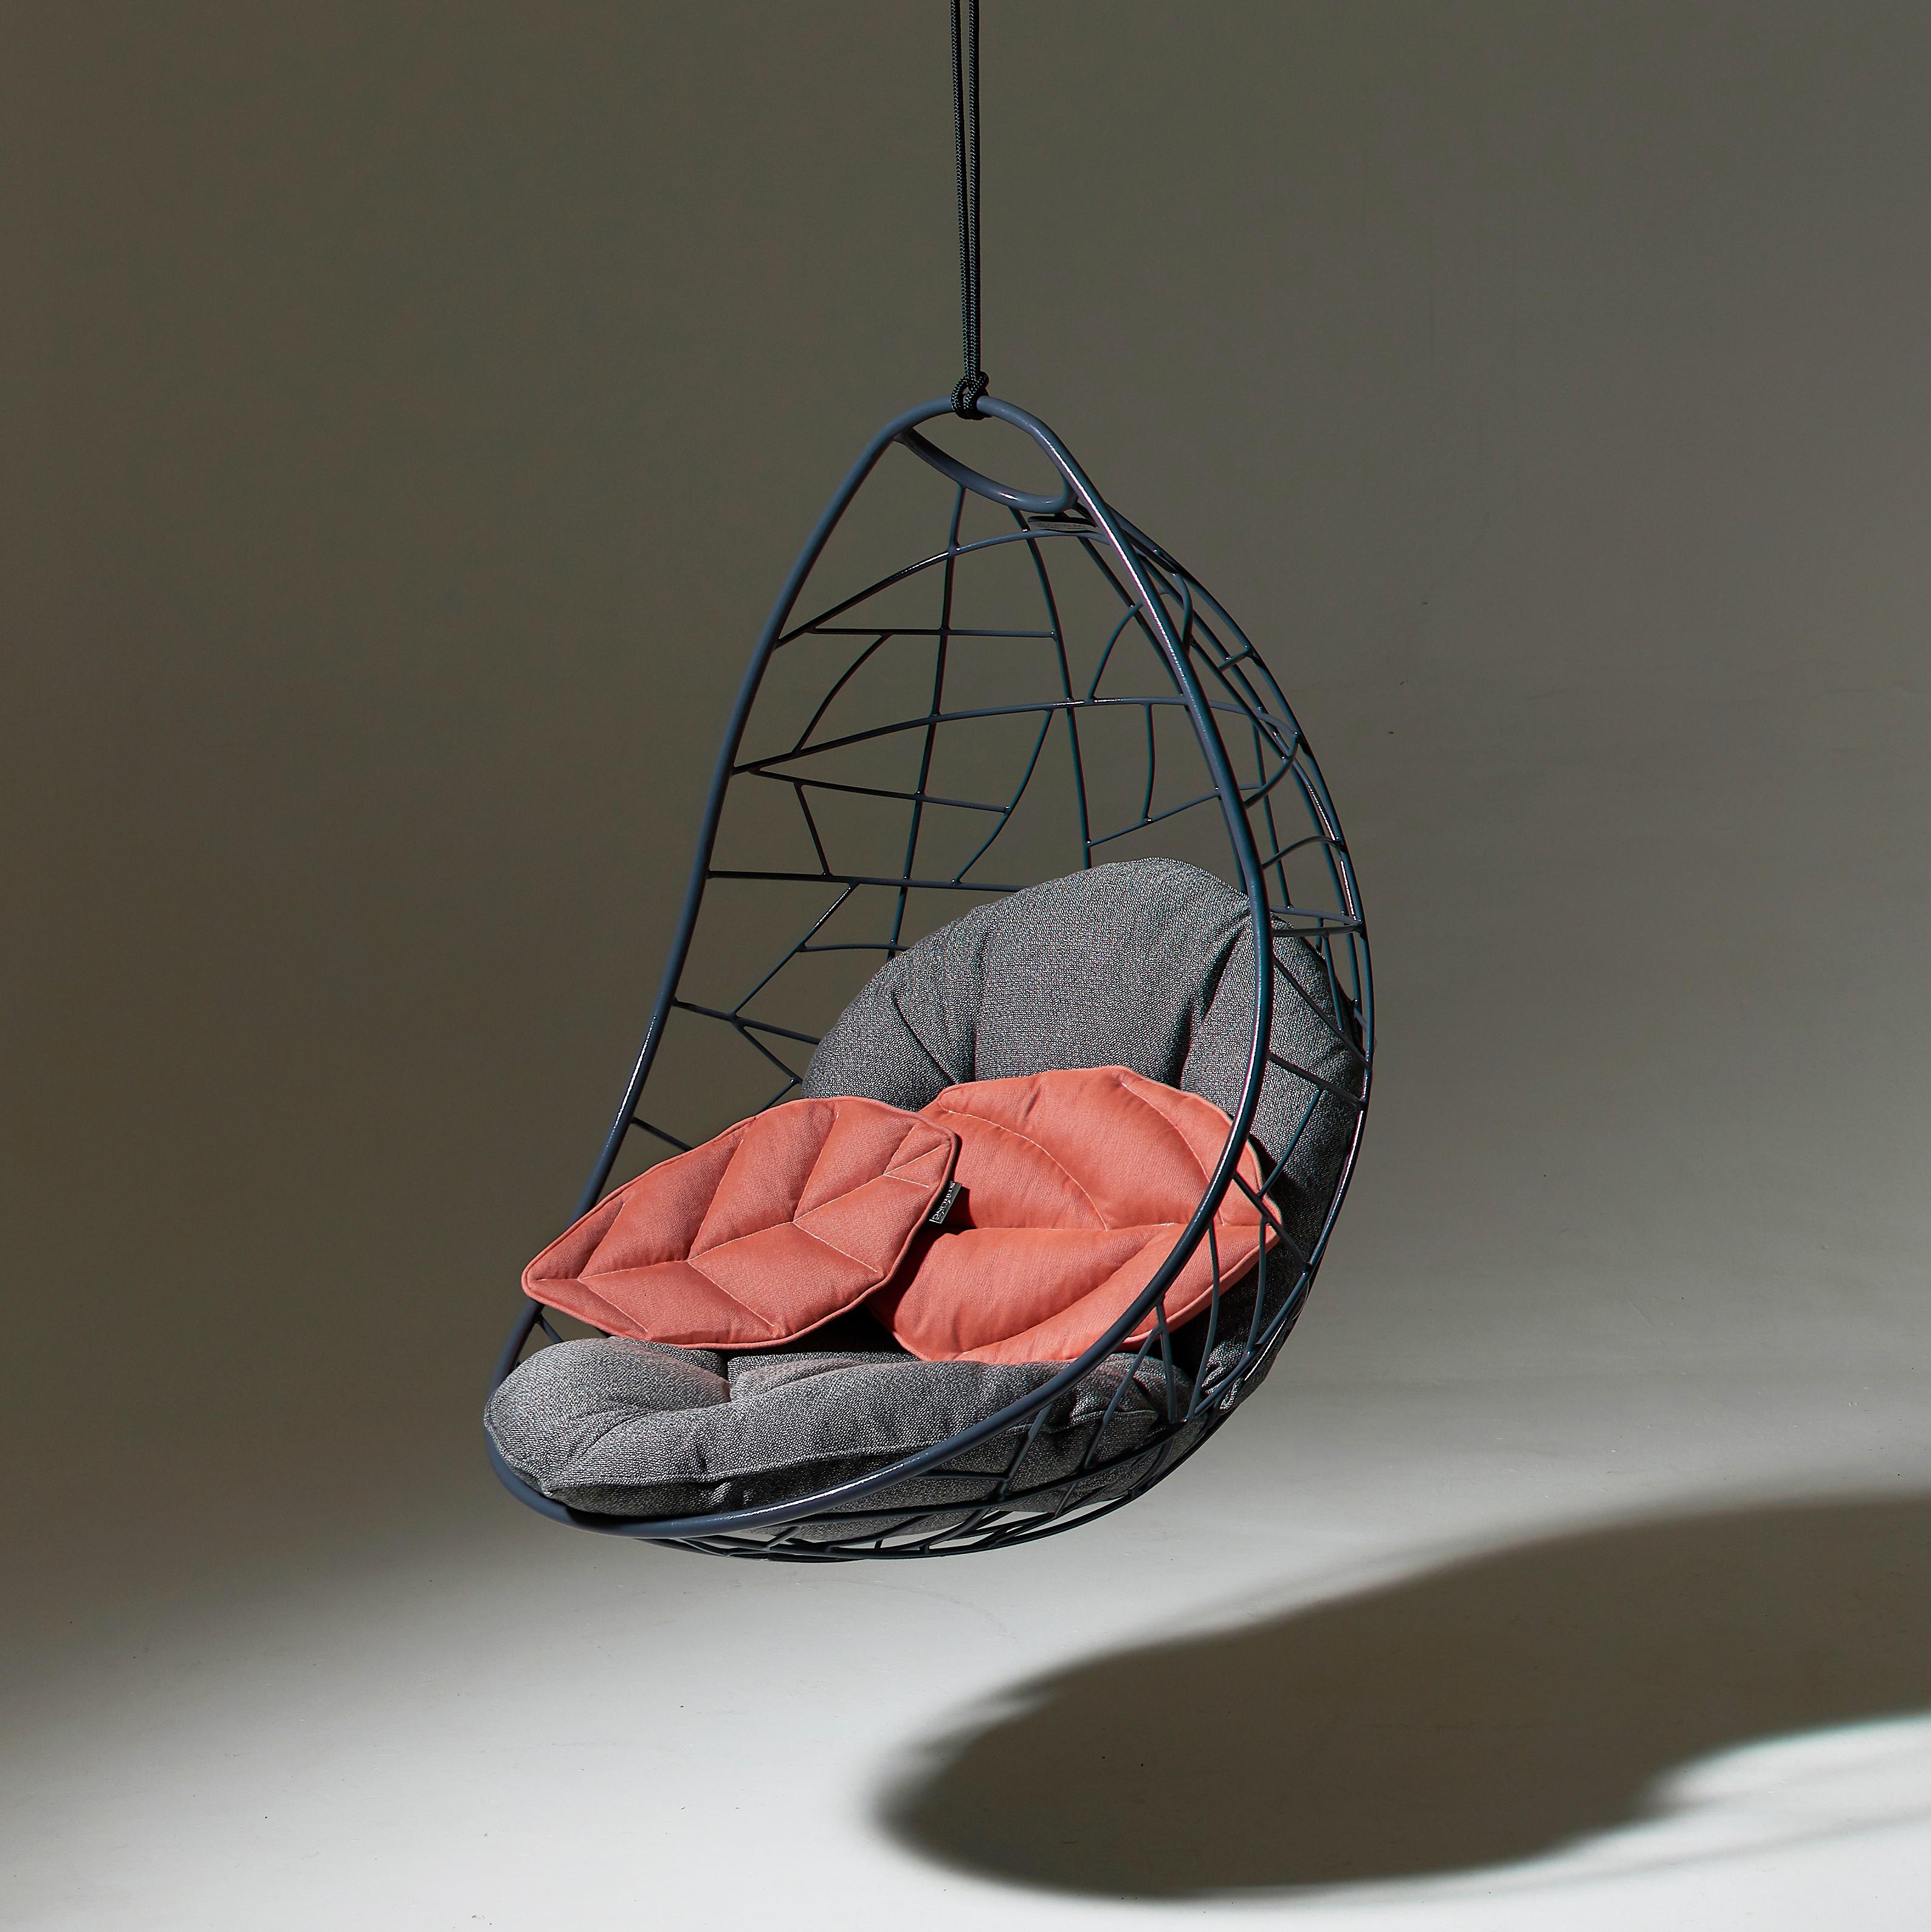 The Nest L'eggs chair is inspired from the organic forms in birds' nests and has a natural egg shape.

The pattern detail is reminiscent of tree branches that intersect, grasses that are intertwined, the veins in dragonfly wings, veins in leaves,